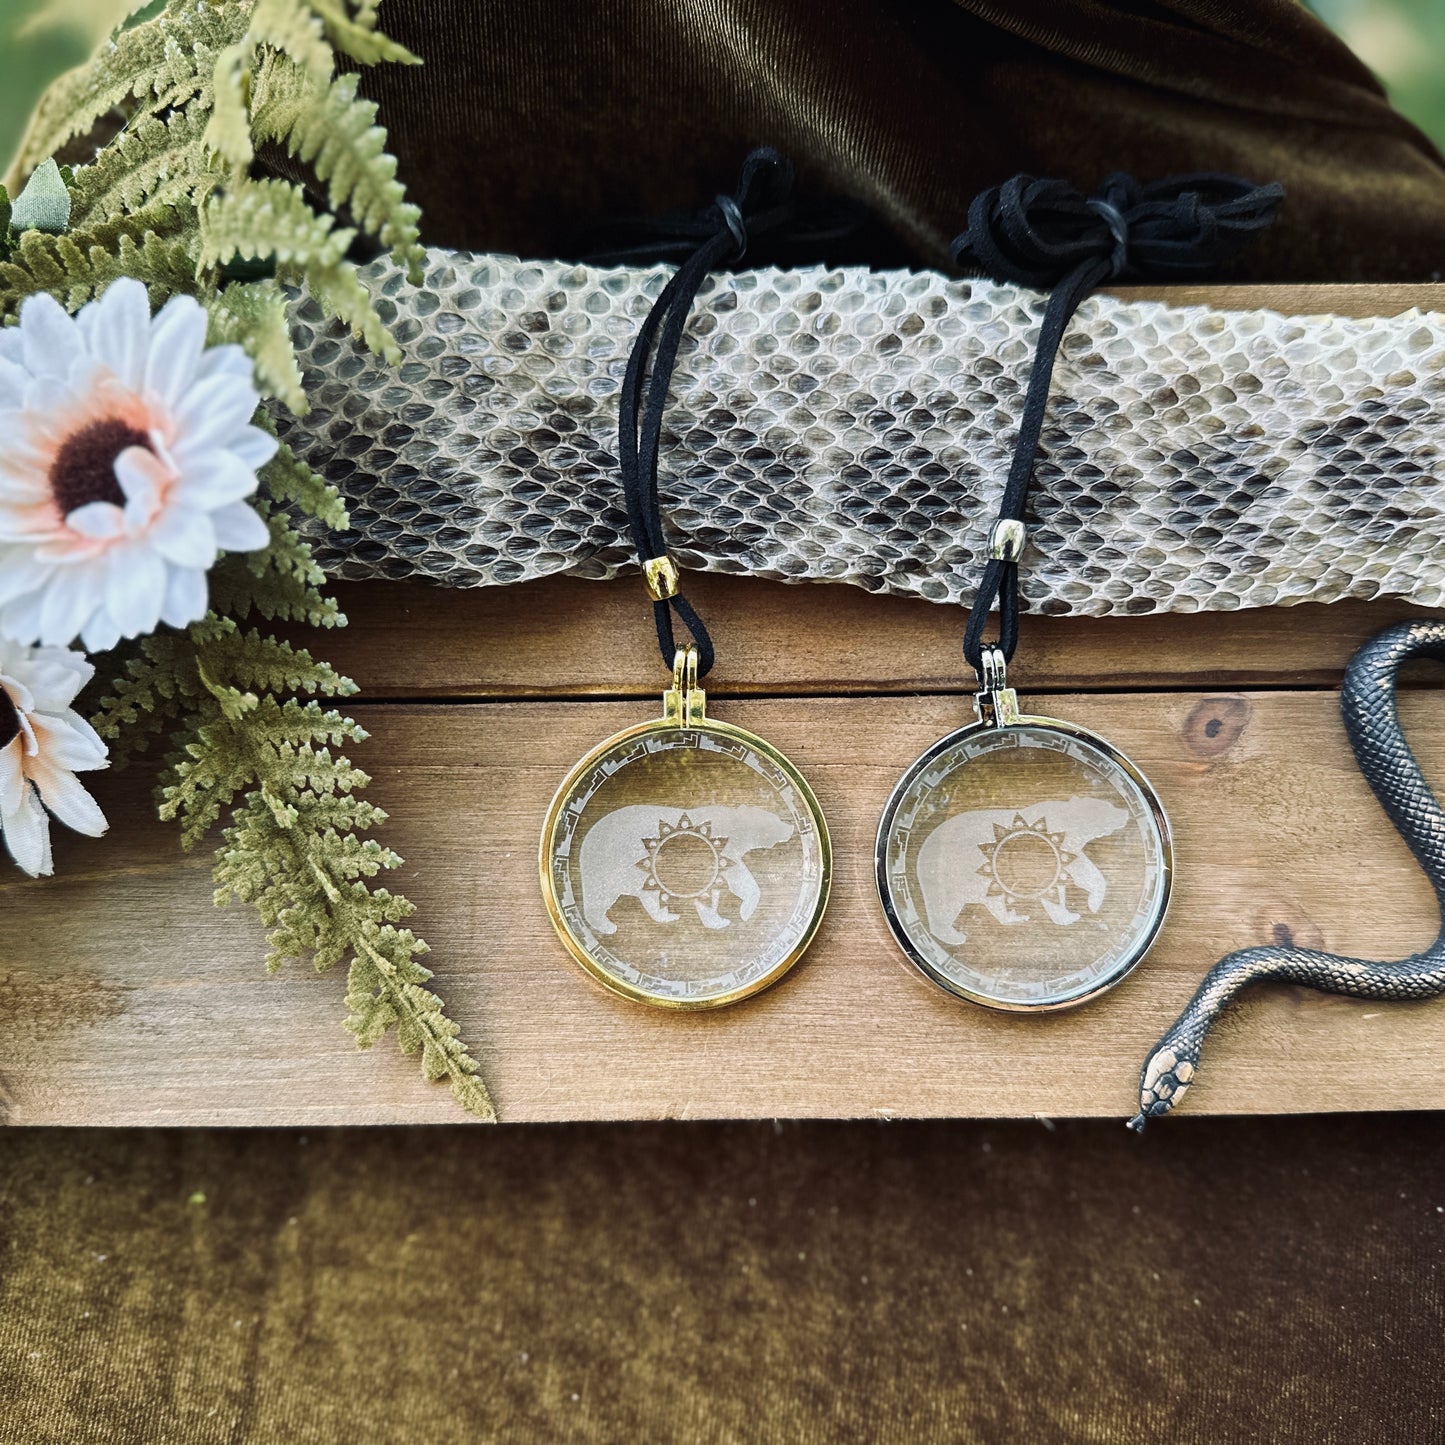 Bear Necklace, Solar Lighter, Magnifying Glass Necklace, Sustainable Jewelry, Cannabis Accessory